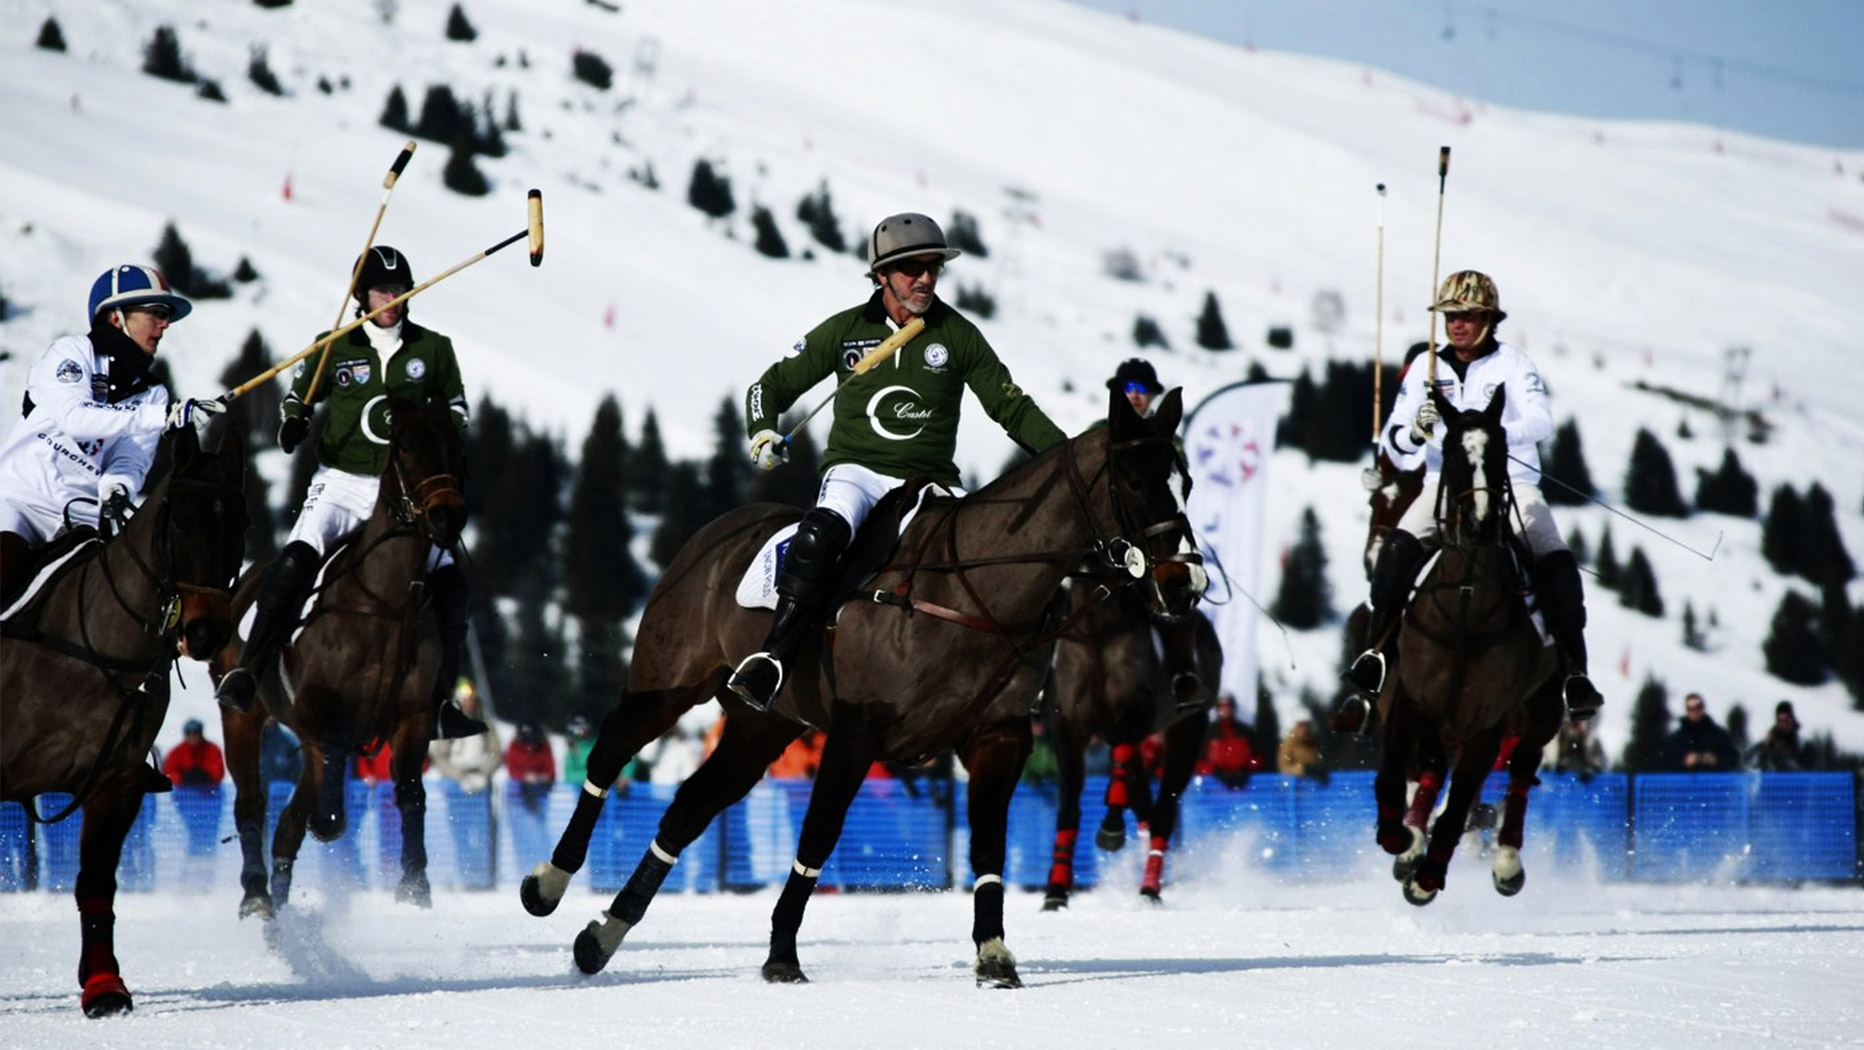 Events, Cheval Blanc, Courchevel 1850, France